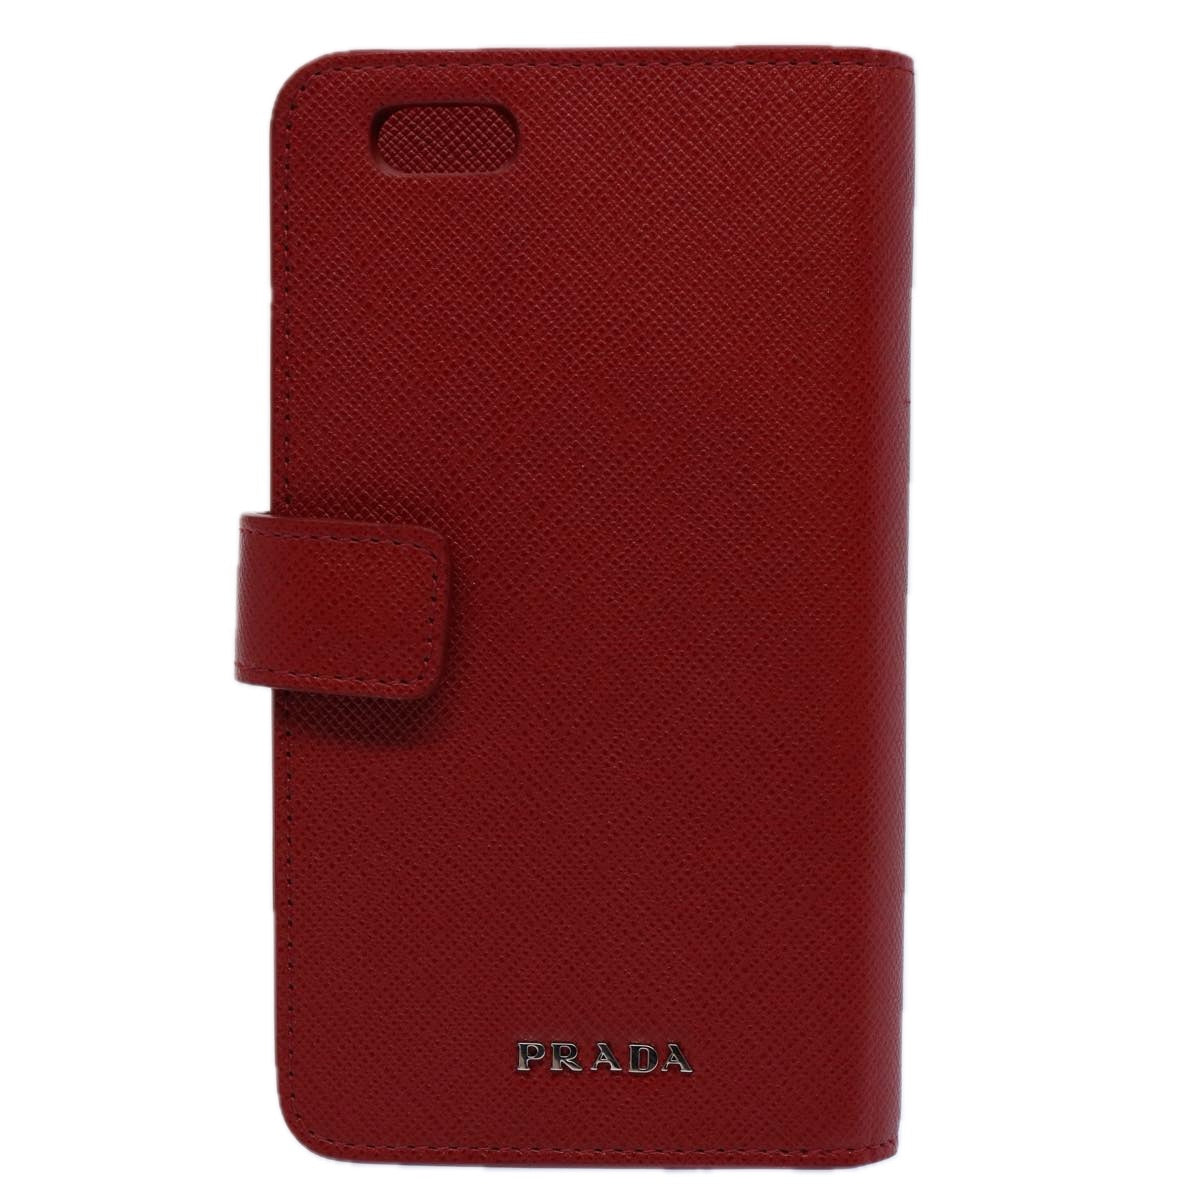 PRADA For iPhone 6 / 6S iPhone Case Safiano leather Red Auth am5276 - 0